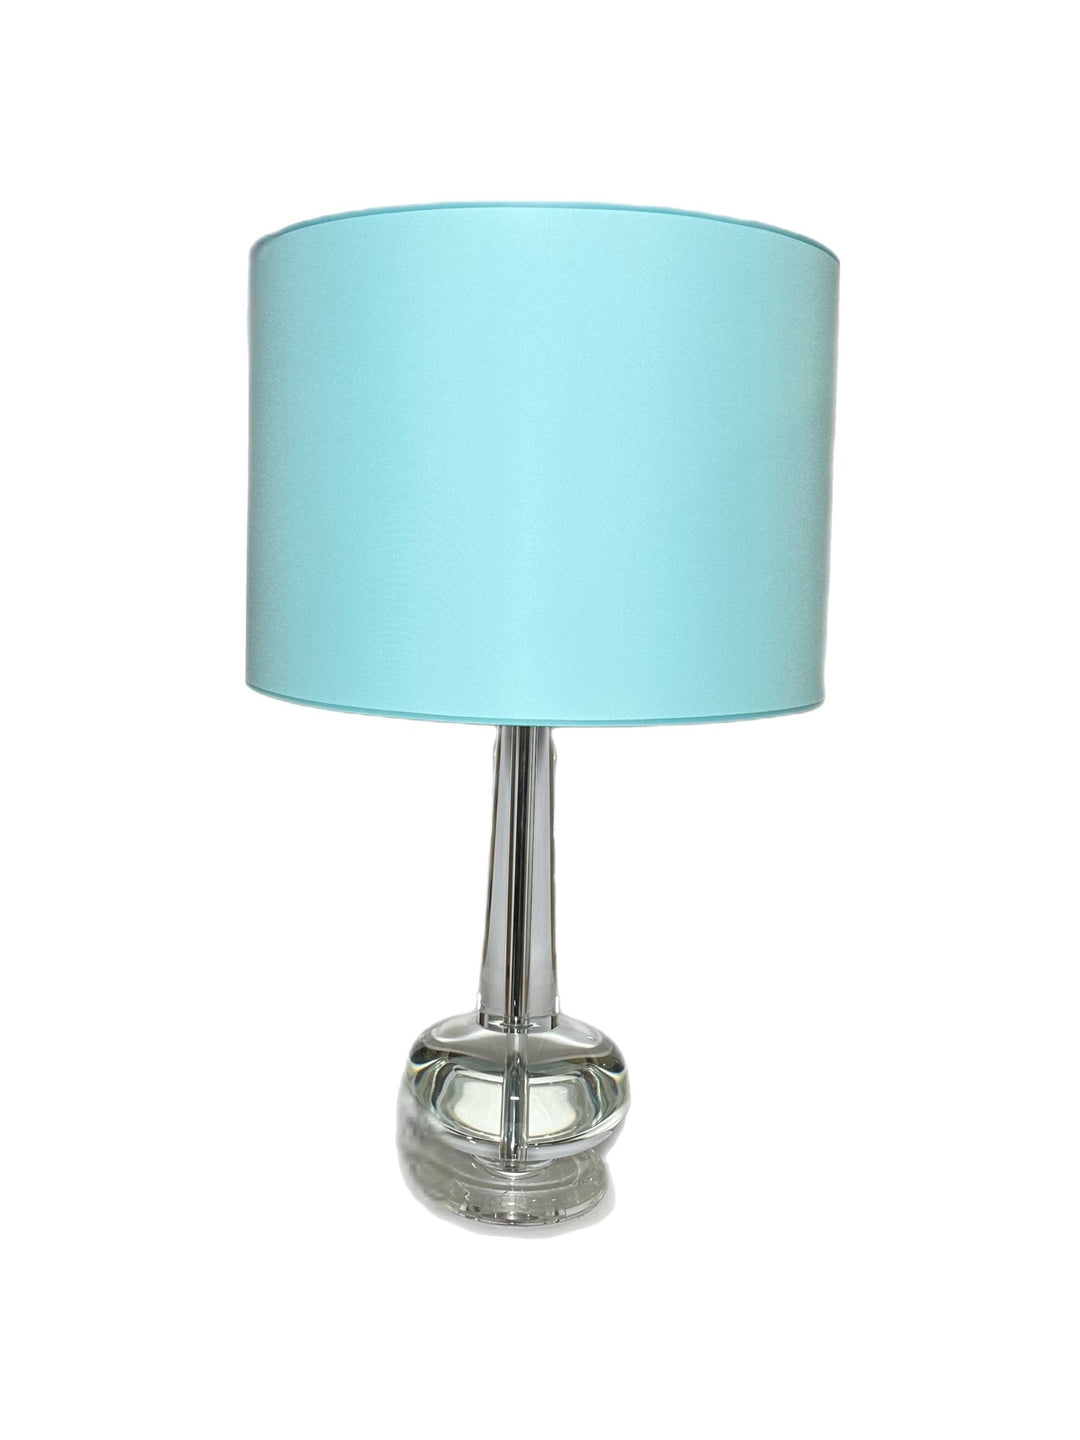 Hardback Drum - multiple sizes and colors - Lux Lamp Shades